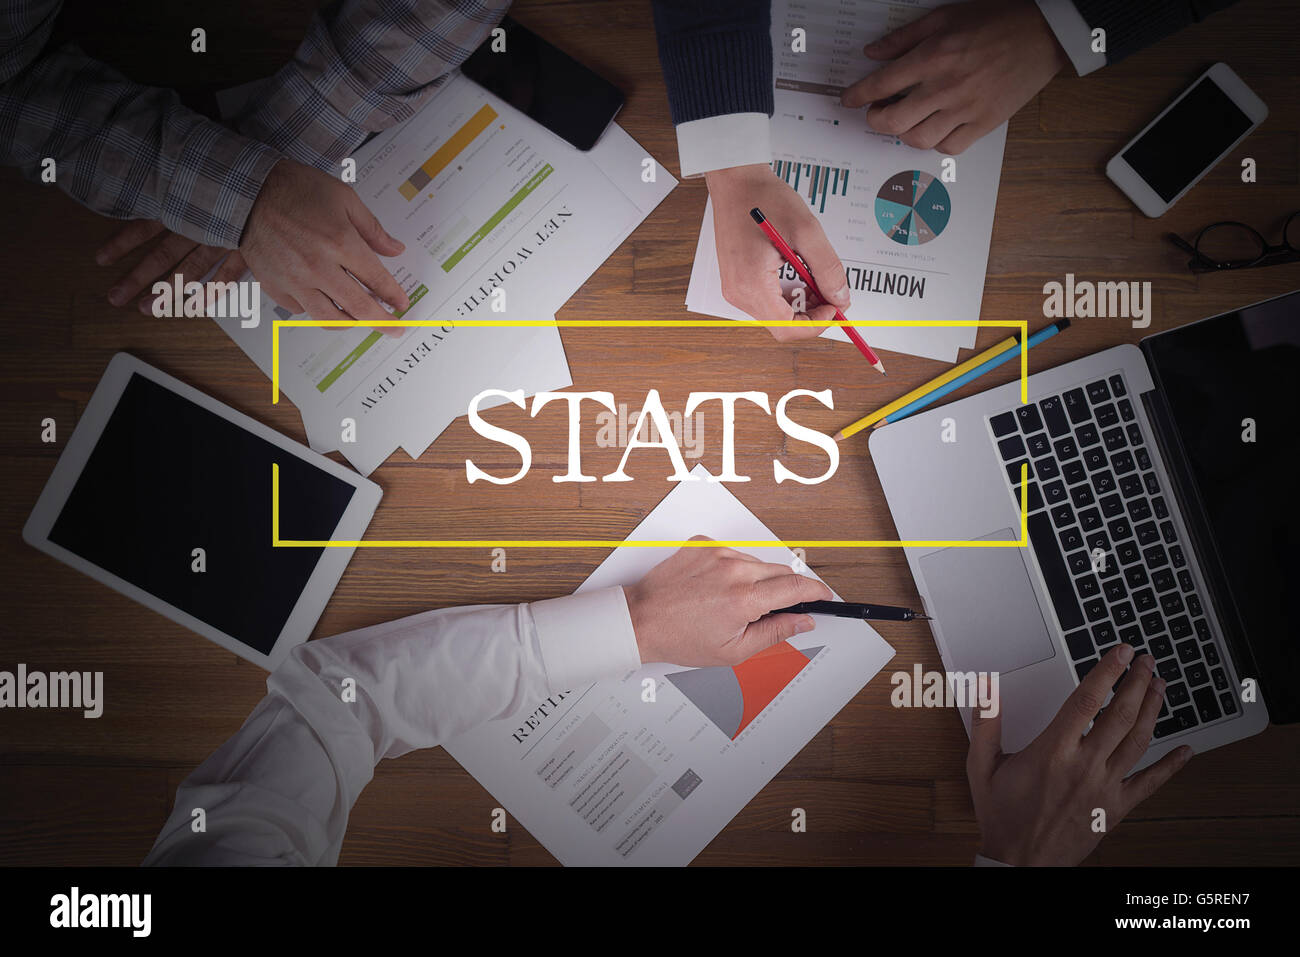 BUSINESS TEAM WORKING OFFICE  Stats TEAMWORK BRAINSTORMING CONCEPT Stock Photo